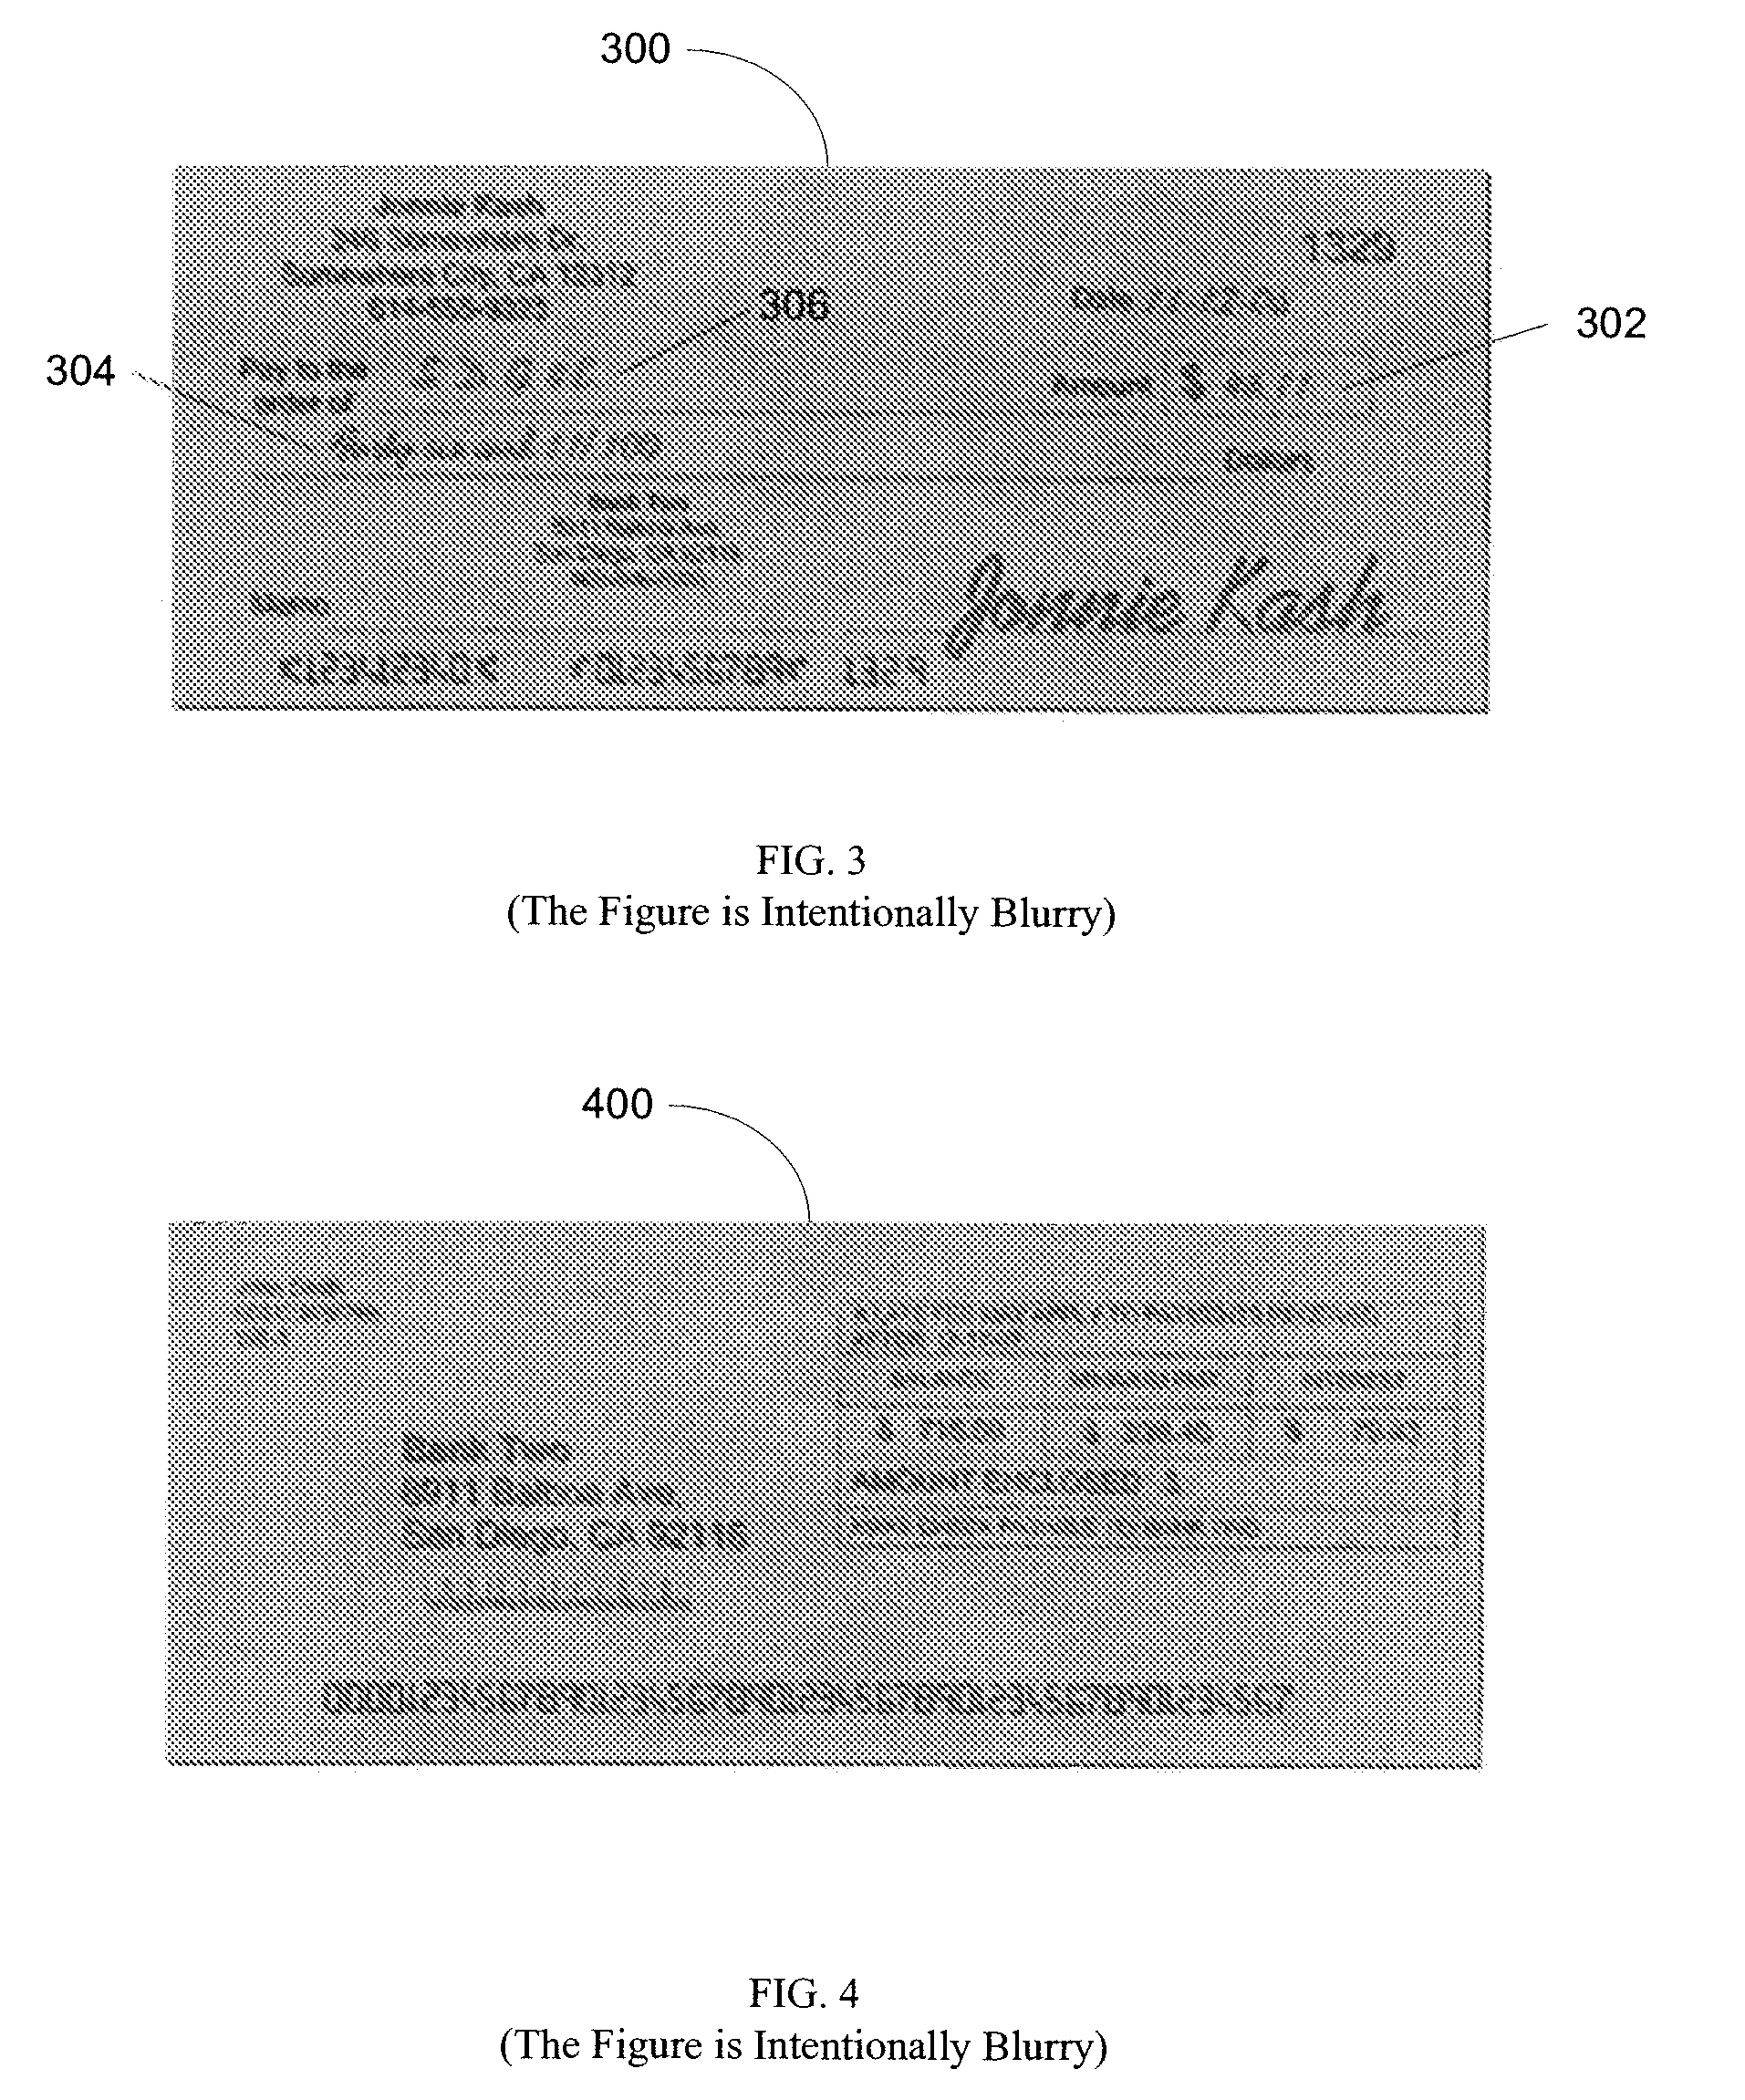 Systems for mobile image capture and processing of documents